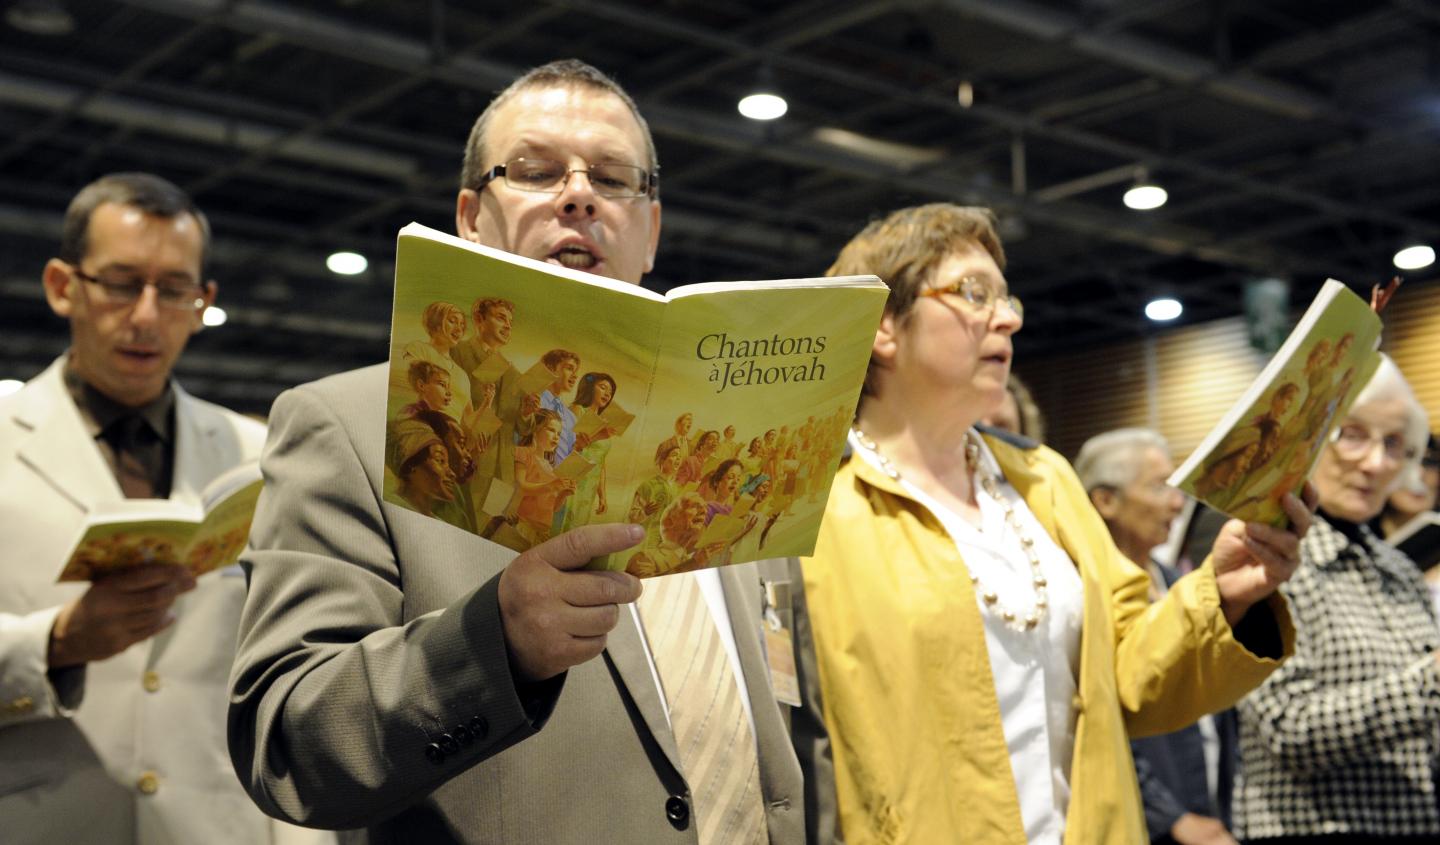 Jehovah's Witnesses in Kazakhstan Fear Repeat of Russia Ban After 'Scary' Crackdown